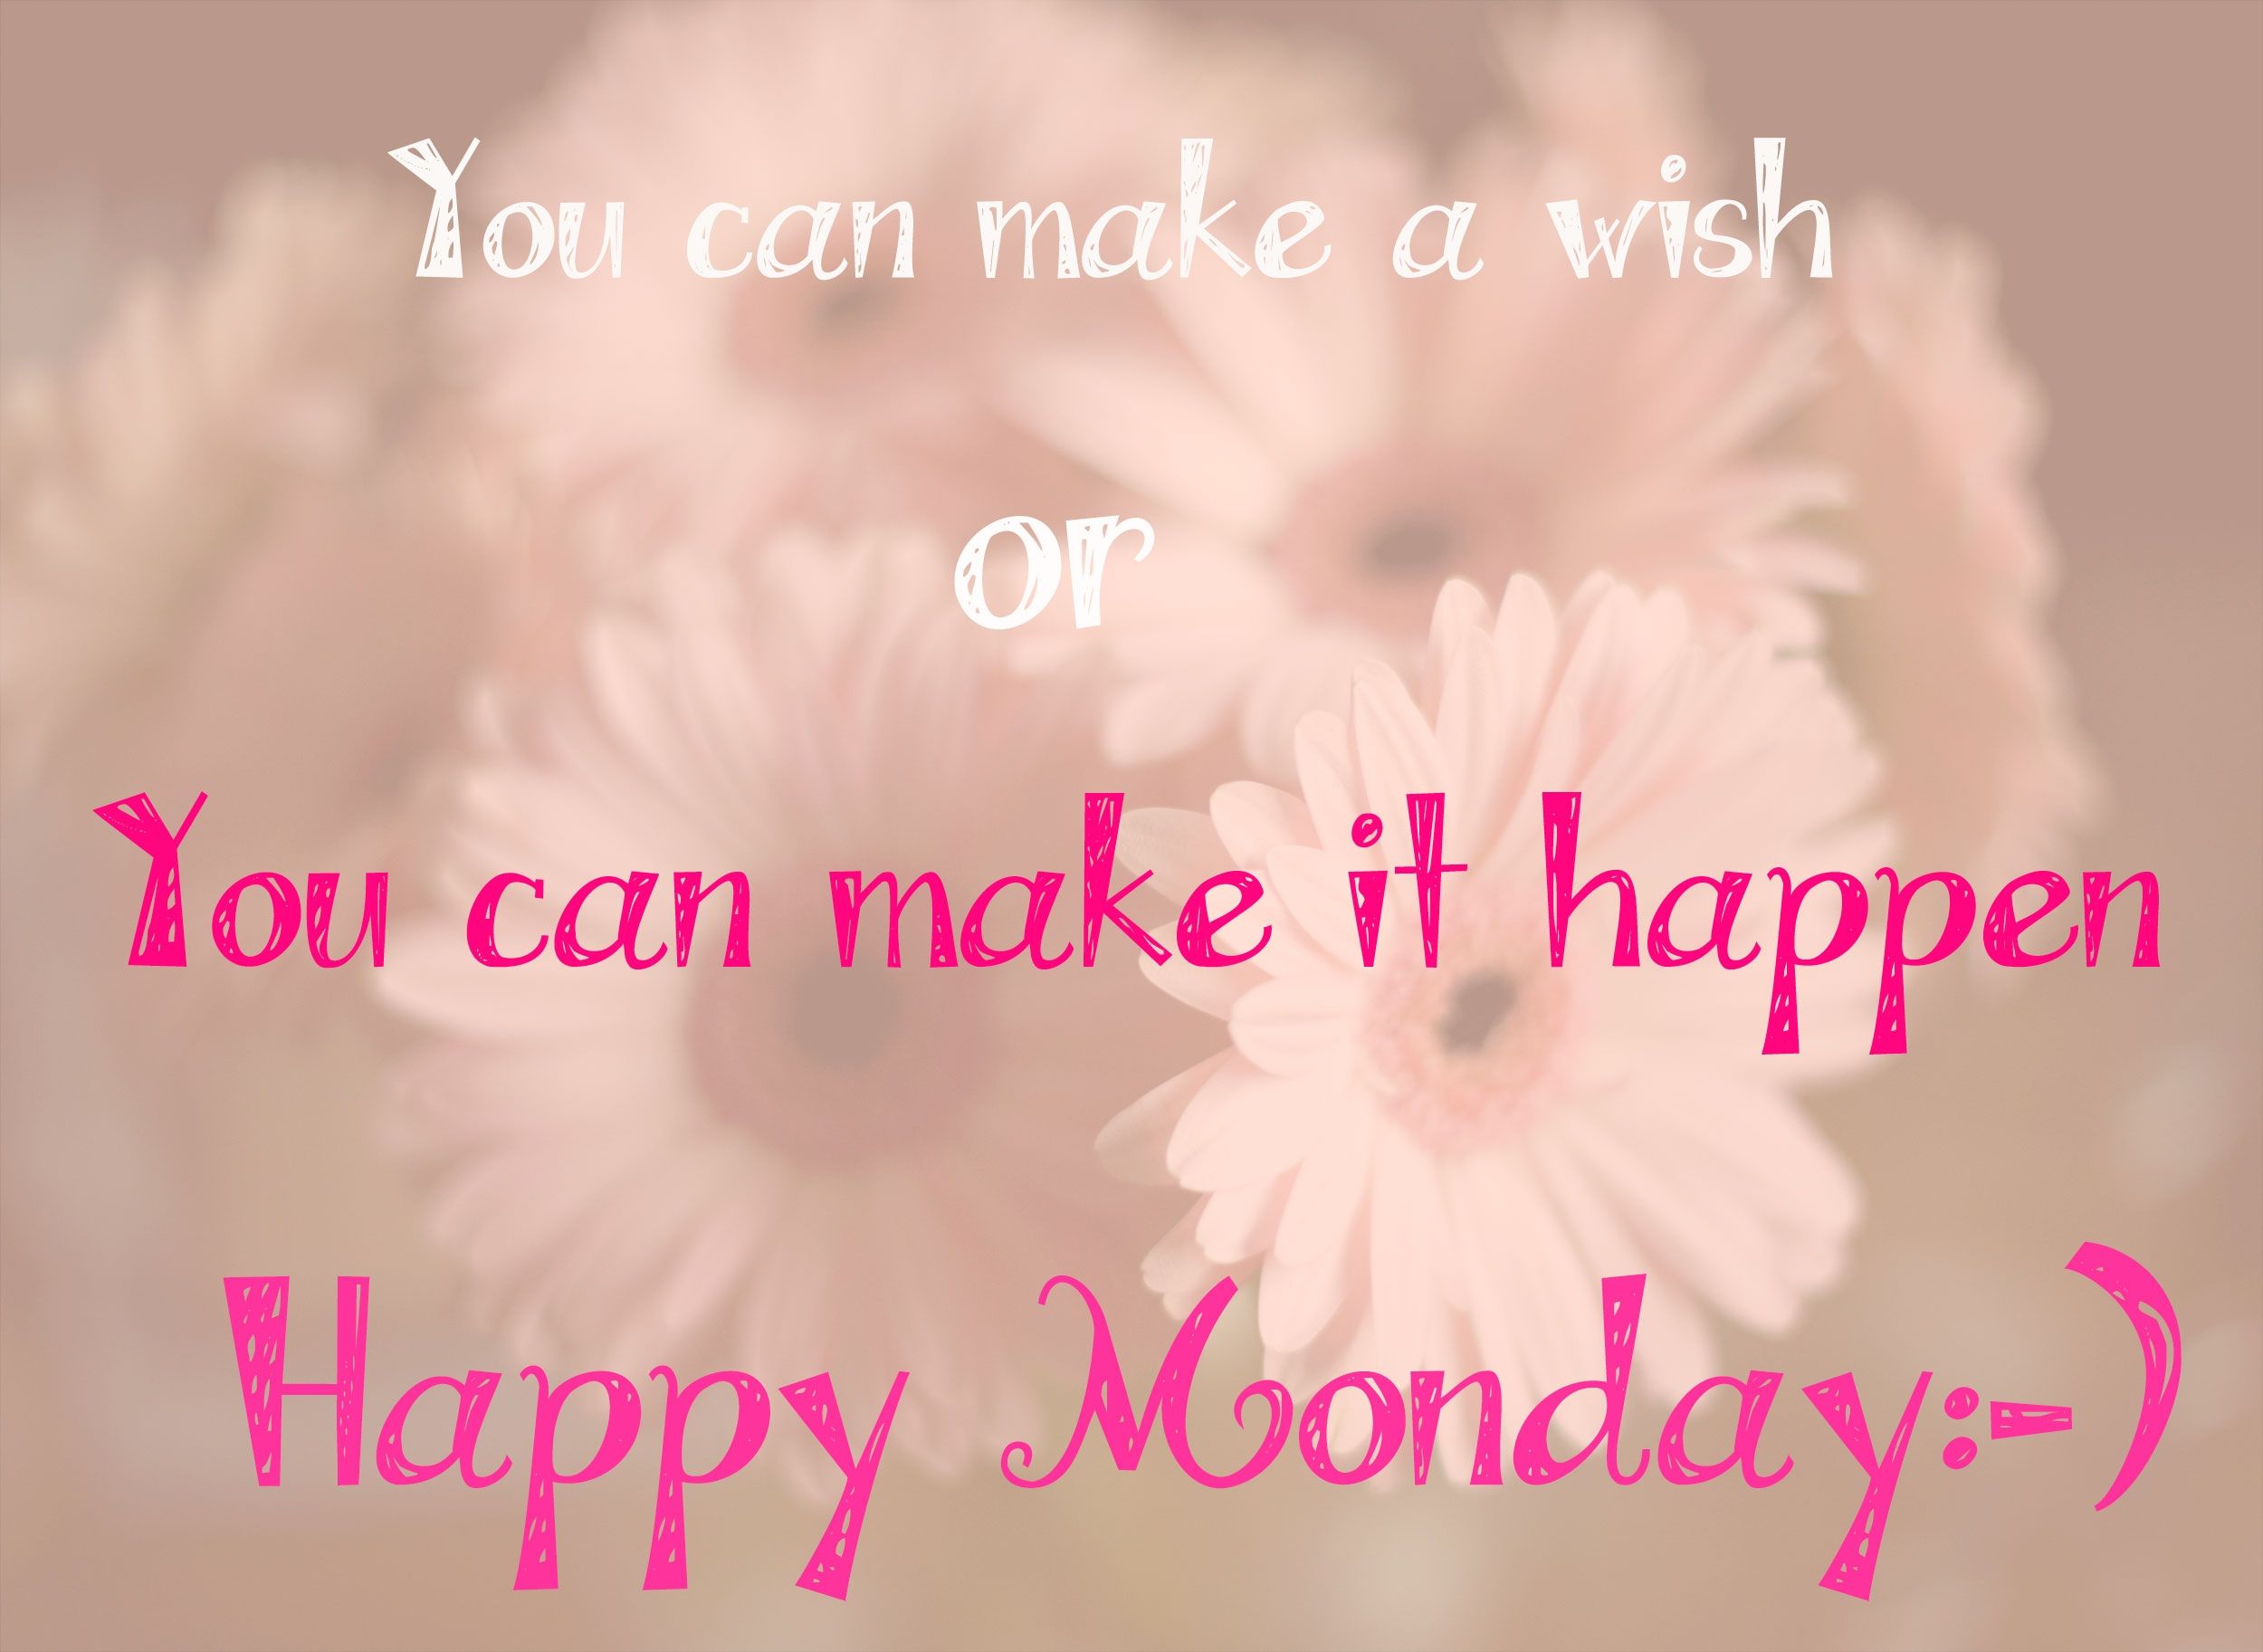 happy monday image Happiness quotes charming happy monday and image jpg